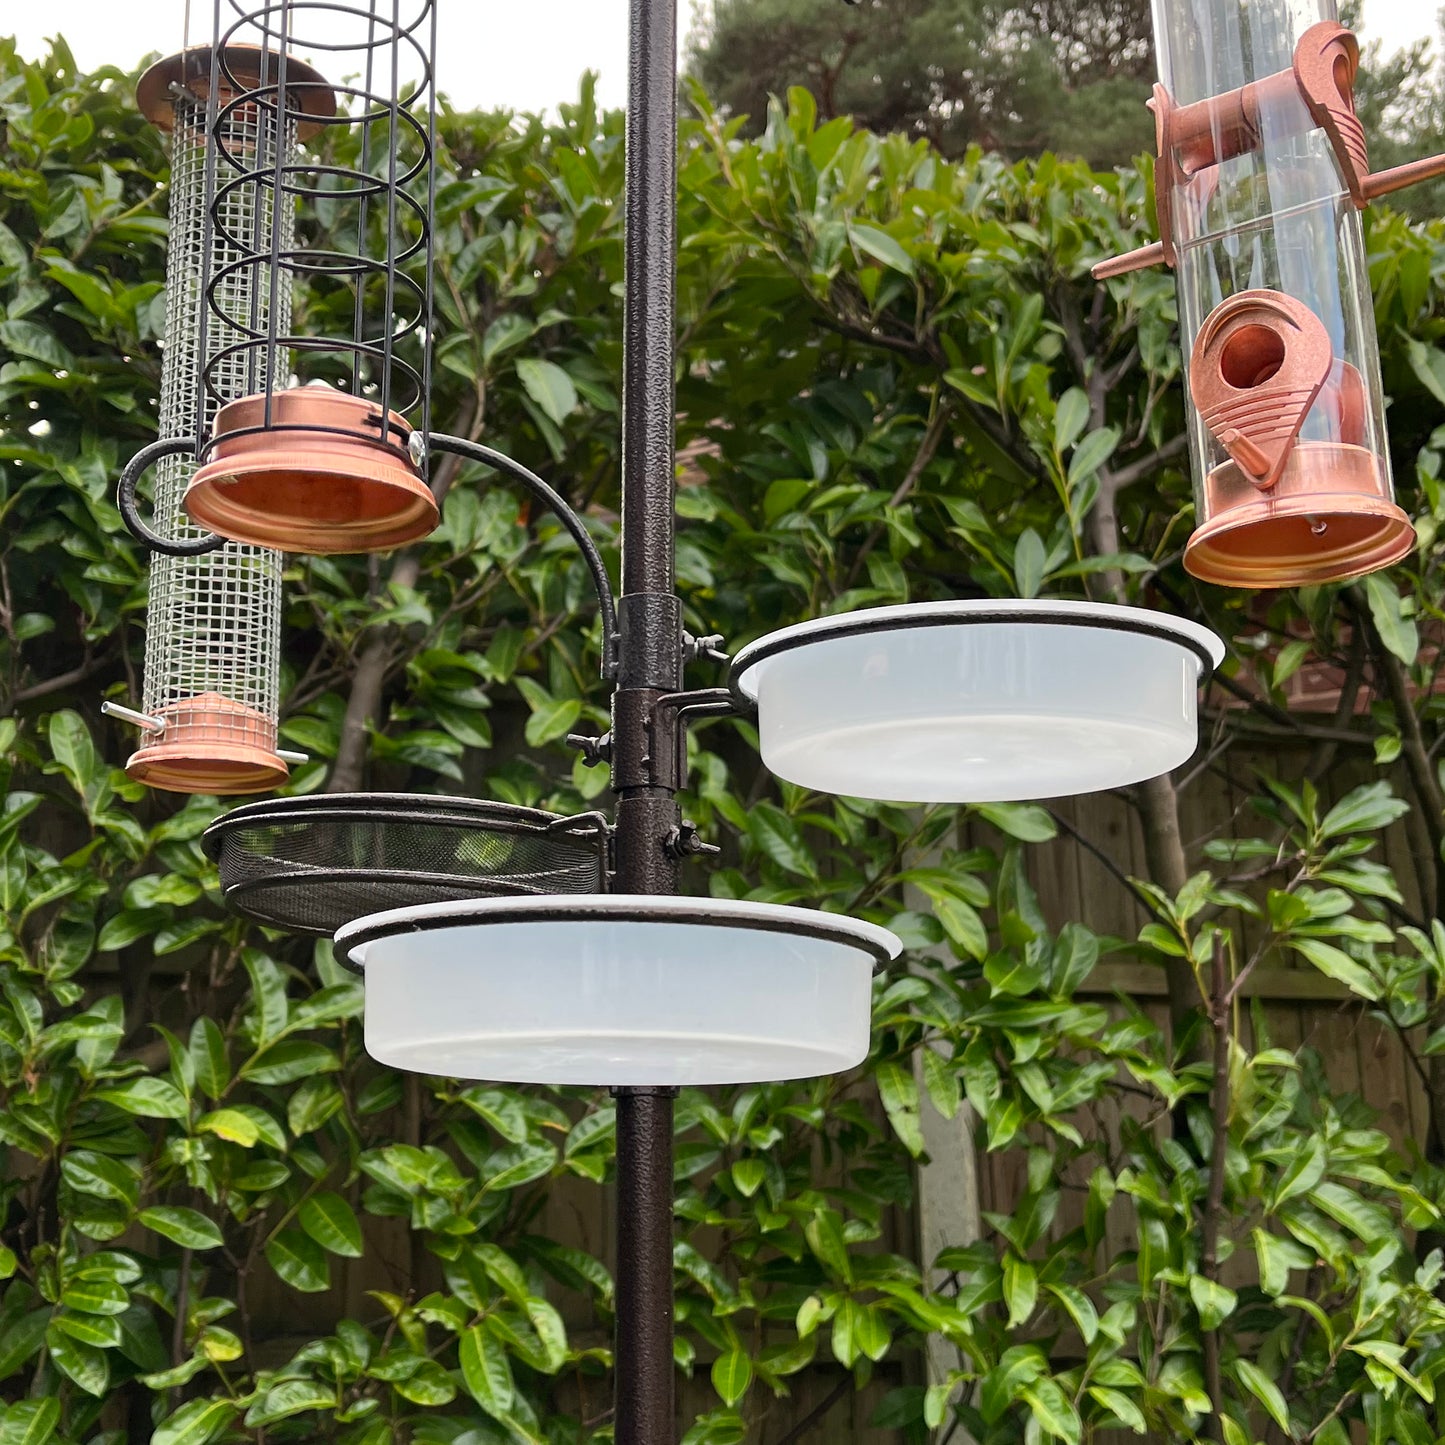 Deluxe Complete Metal Bird Feeding Station with Large Copper Style Feeders & Baffle